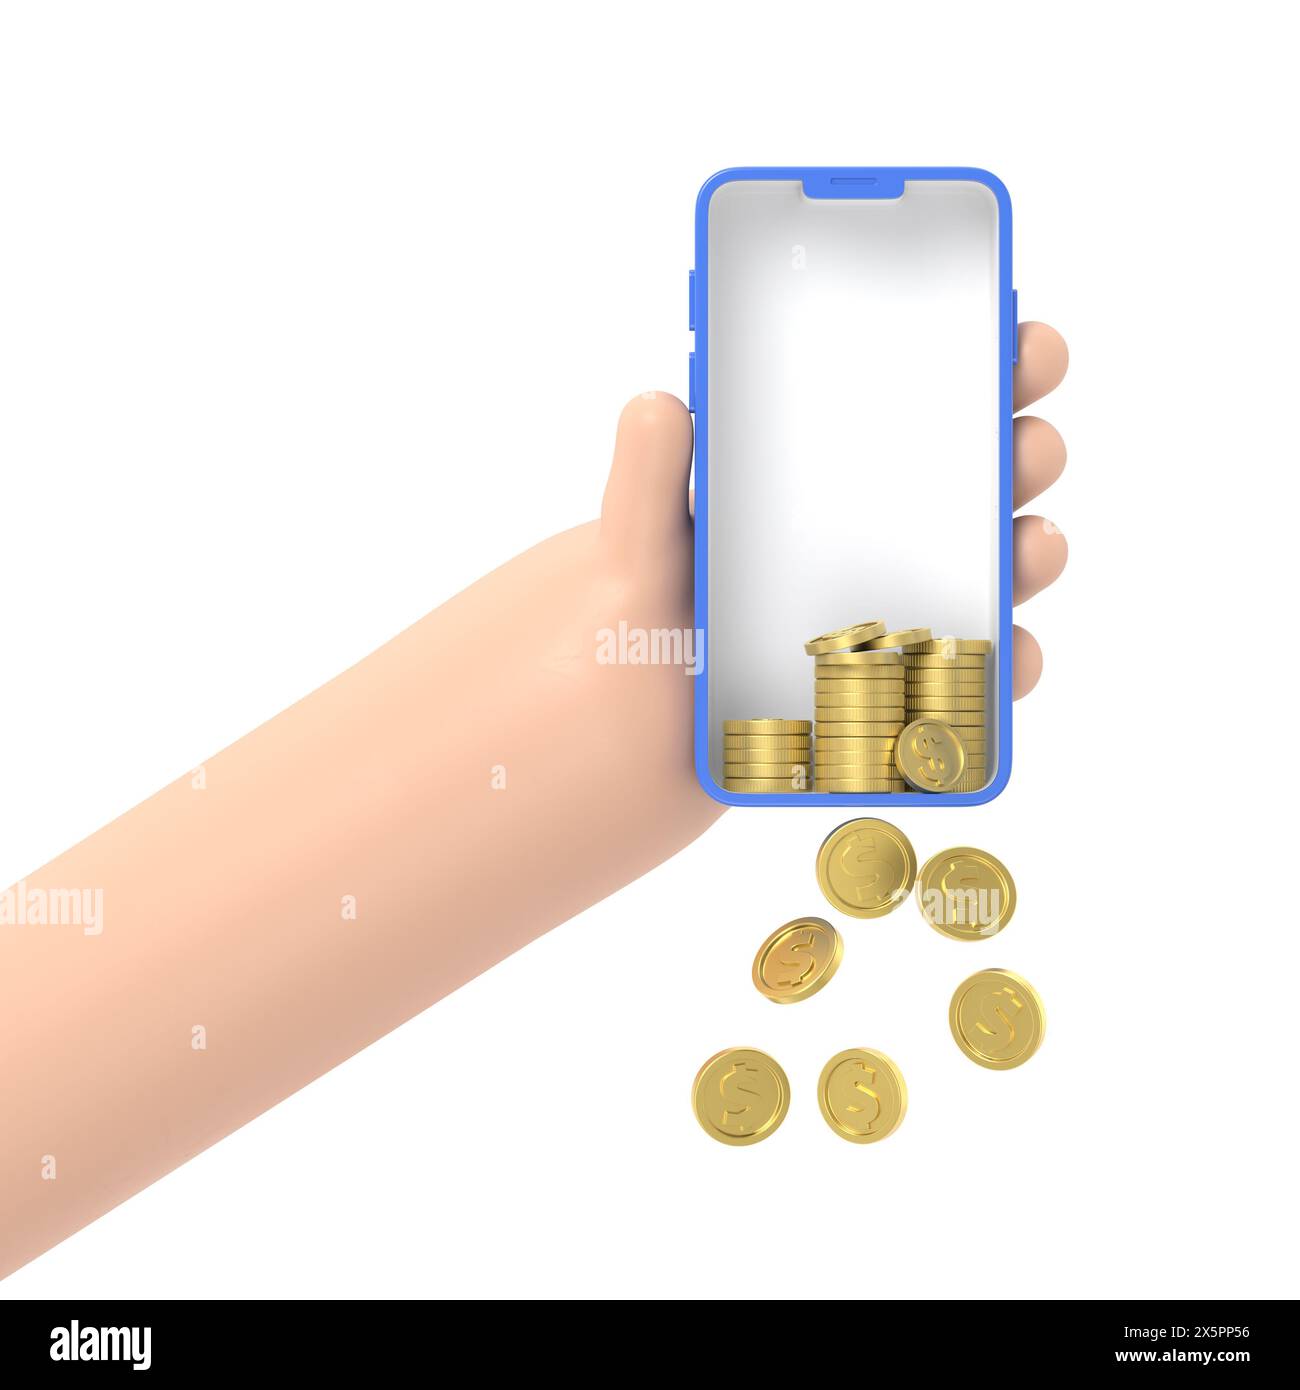 Cartoon Gesture Icon Mockup.Cartoon hand with phone and coins falling. Cashback and earning. Concept of financial mobile app and banking.3D rendering Stock Photo